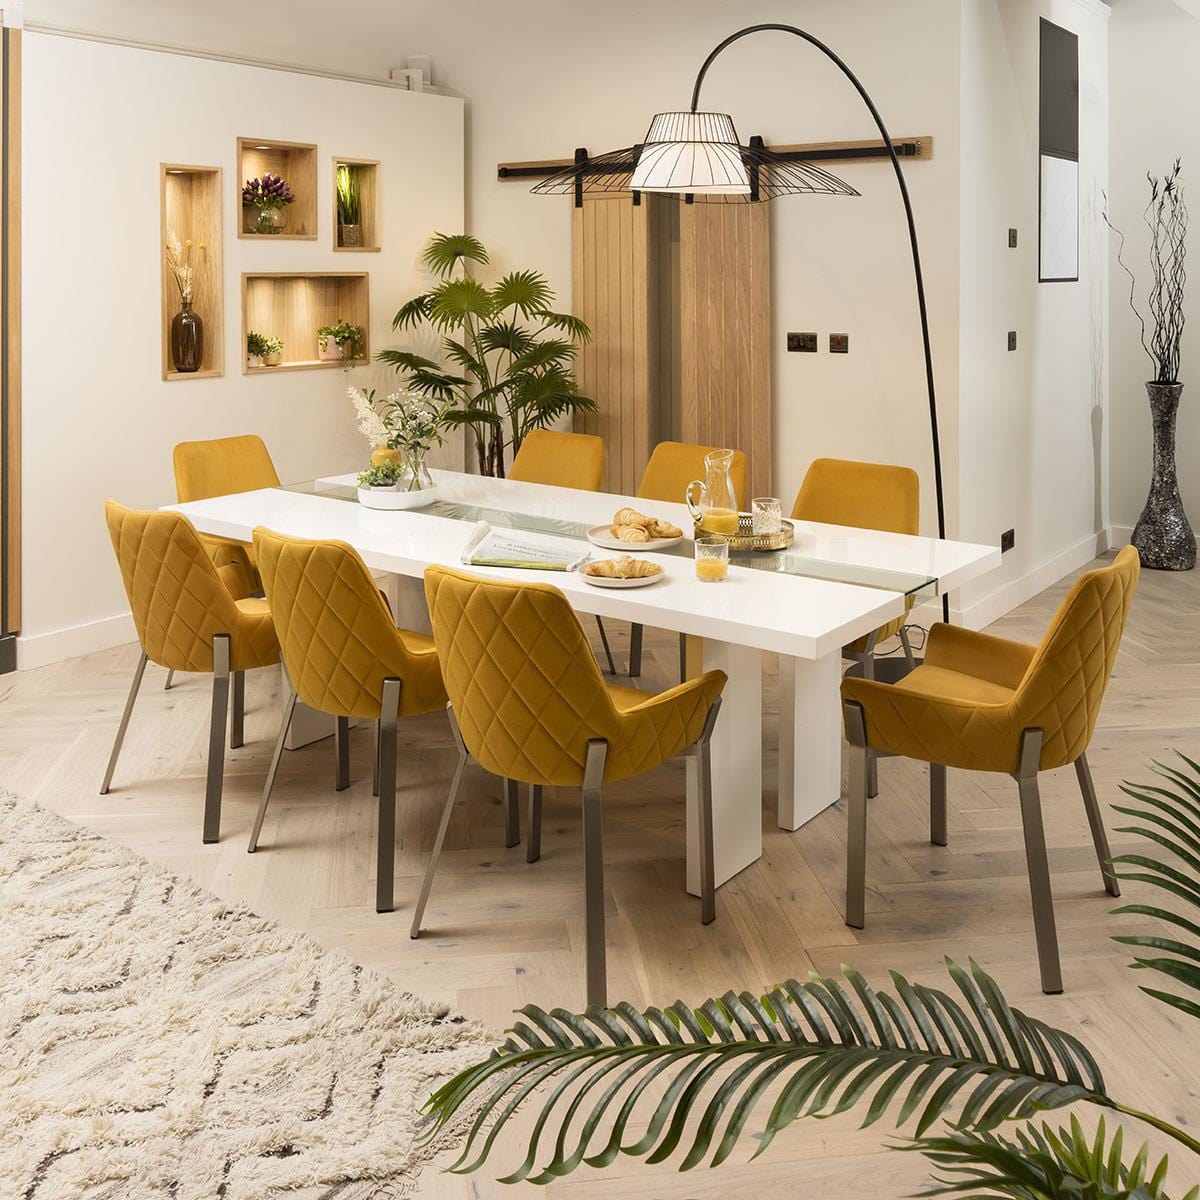 Quatropi Luna 8 Seater Dining Table and Chairs White Mustard